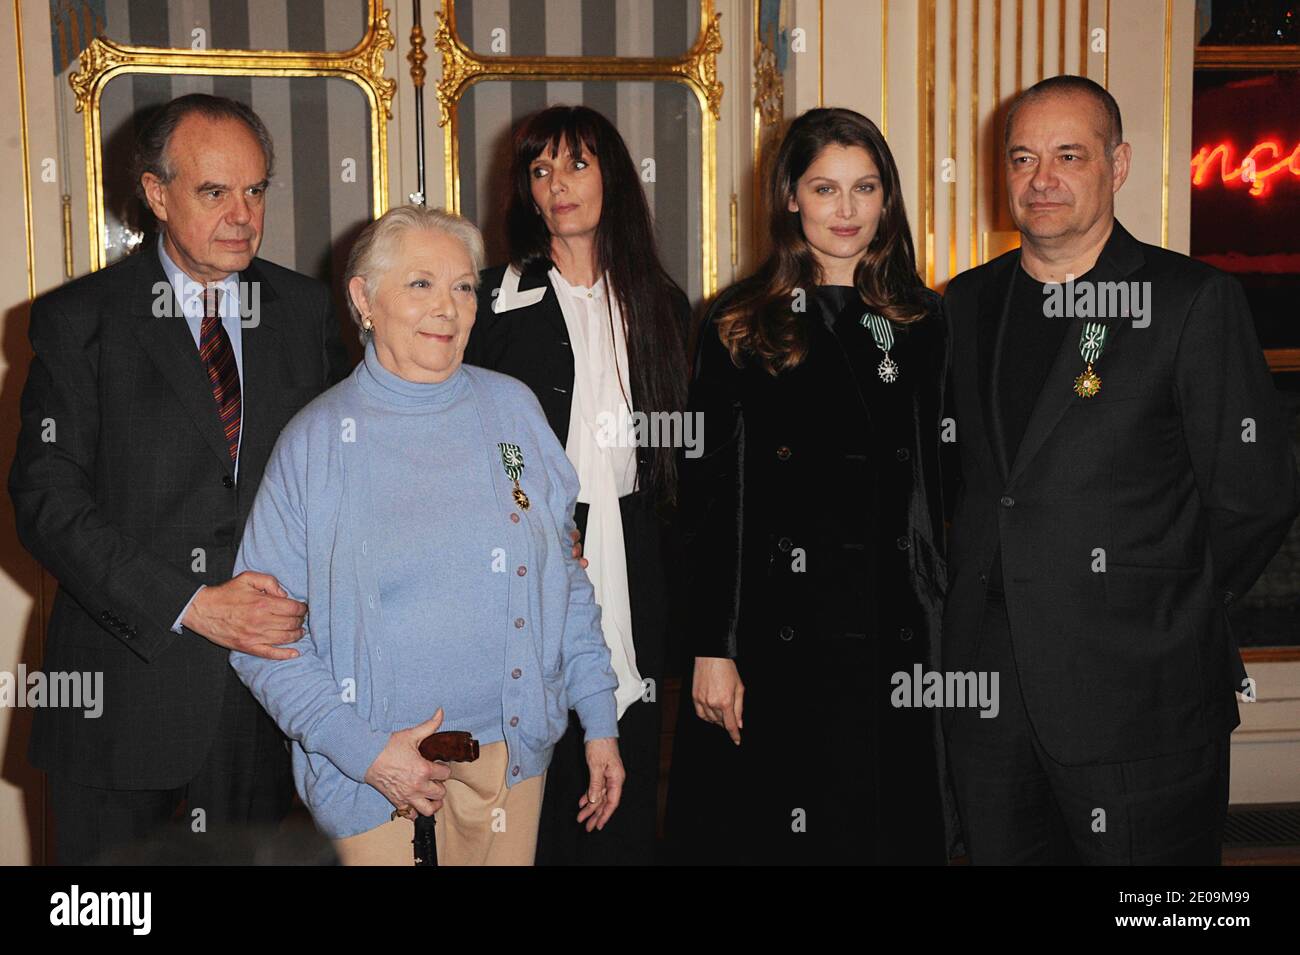 Laetitia Casta, Jean-Pierre Jeunet, Claude Gensac and Aline Bonneteau by French Culture Minister Frederic Mitterrand during a ceremony at Culture Ministry on in Paris, France on February 1st, 2012.. Photo by Giancarlo Gorassini/ABACAPRESS.COM Stock Photo